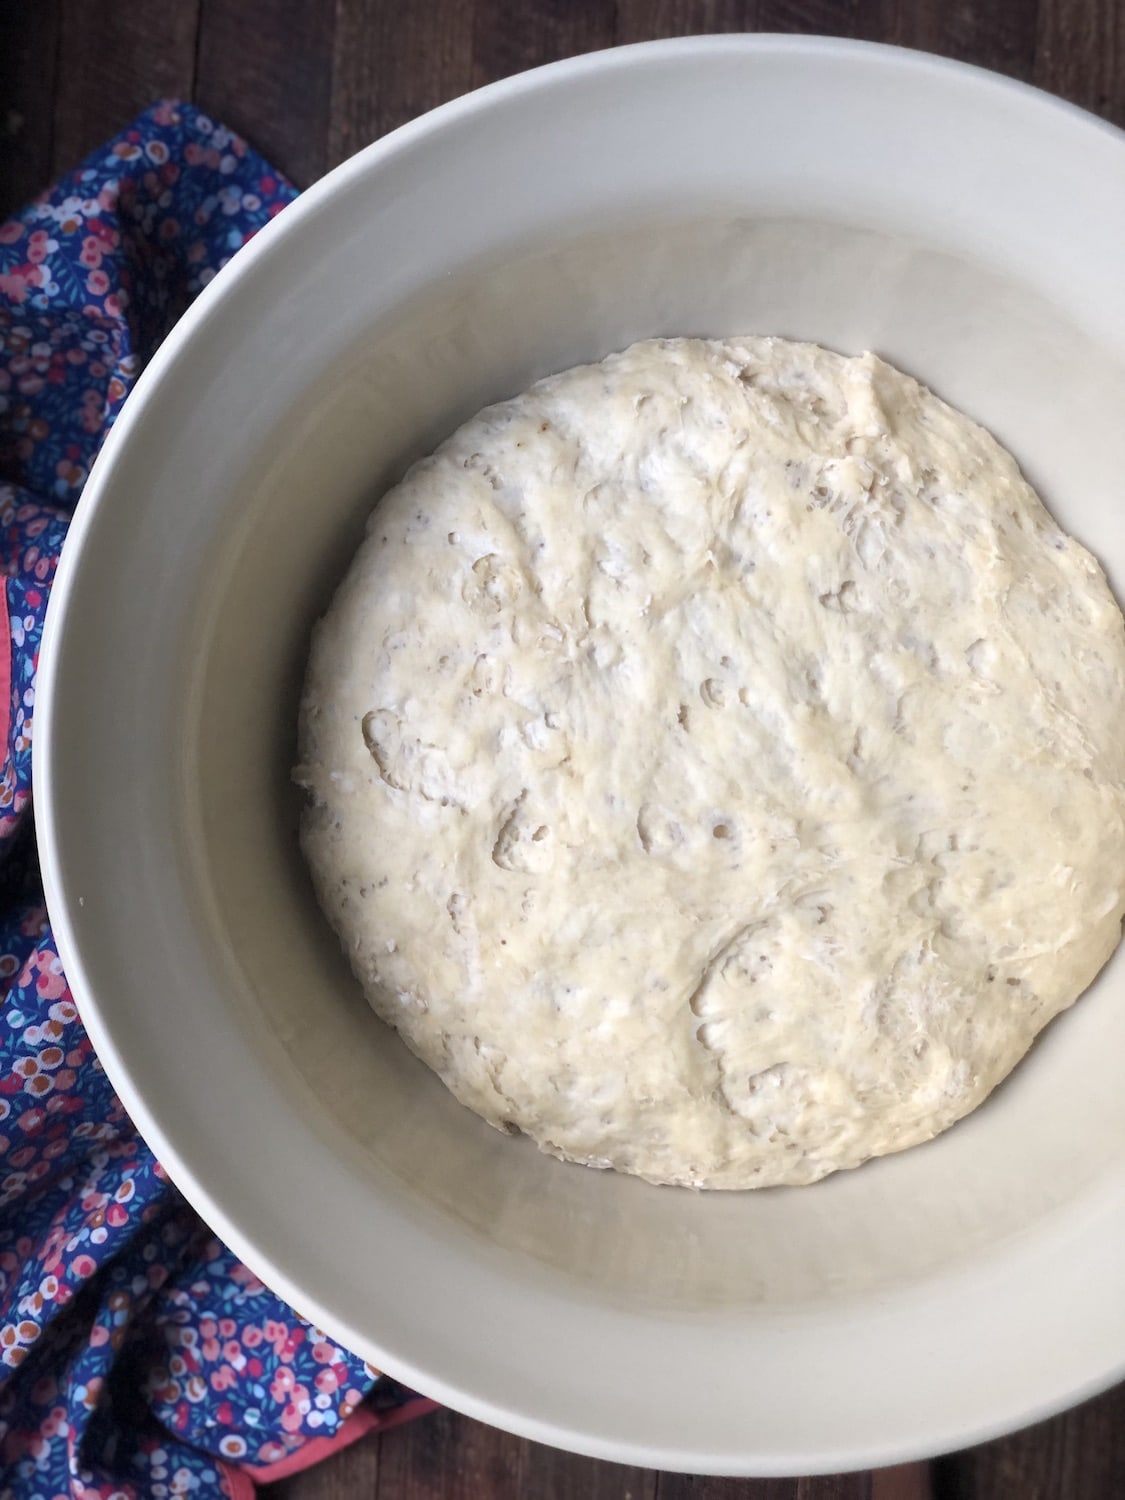 Dough that has risen overnight in a bowl with a purple vintage napkin